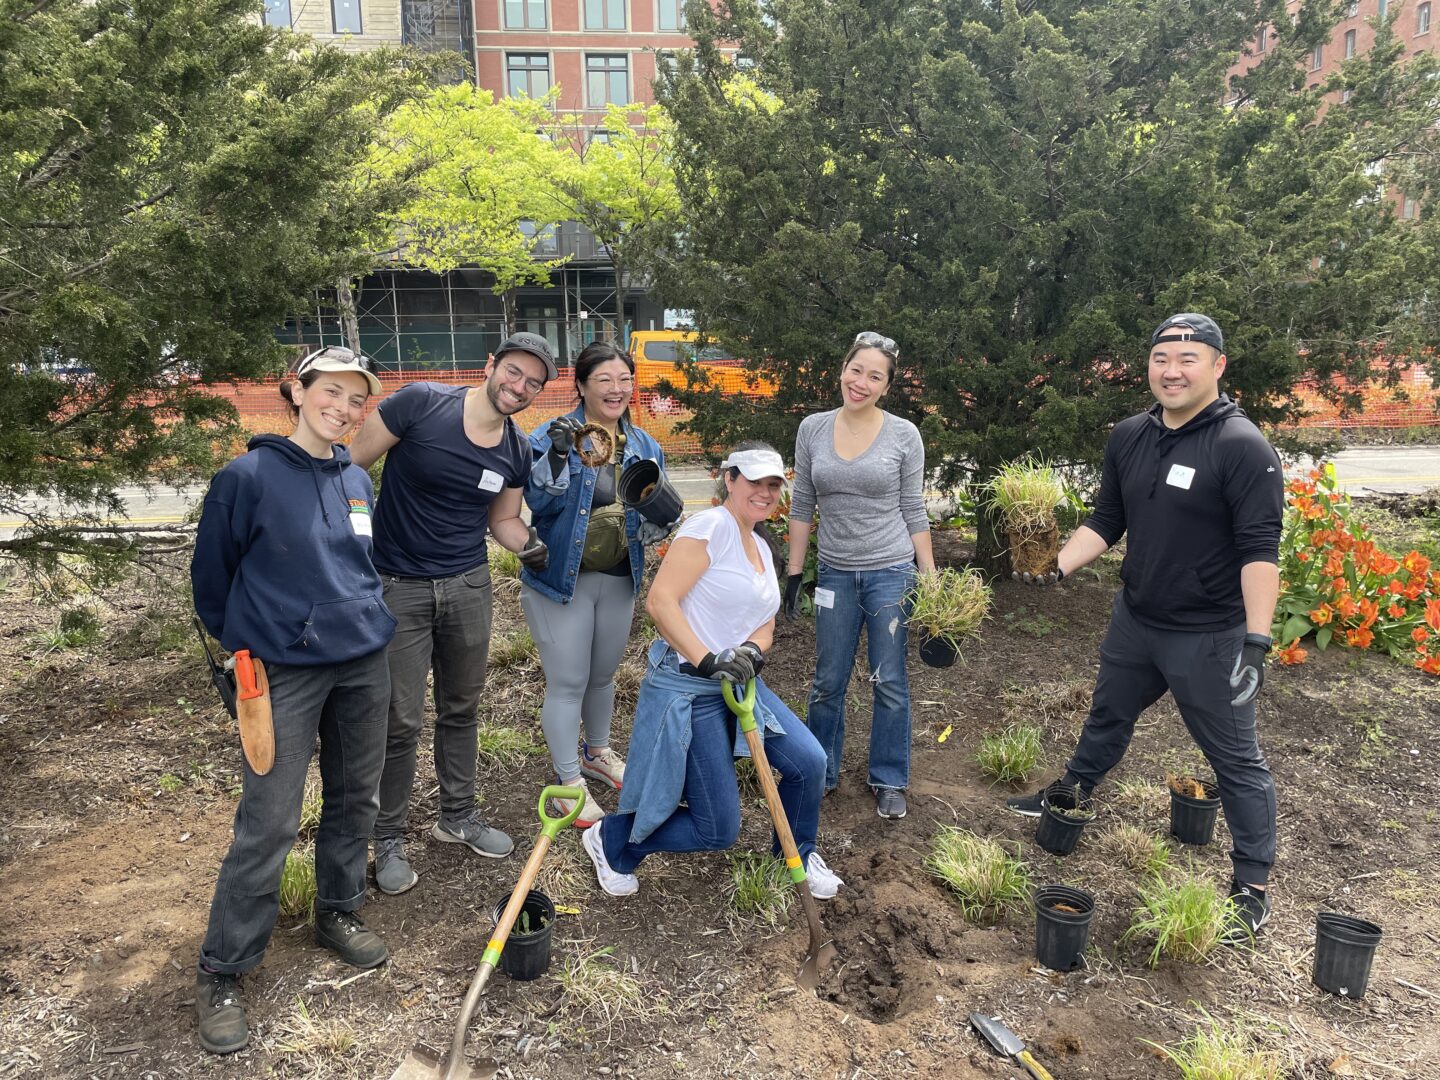 A group of HRPK Green Team volunteers pose for a photo in a garden bed